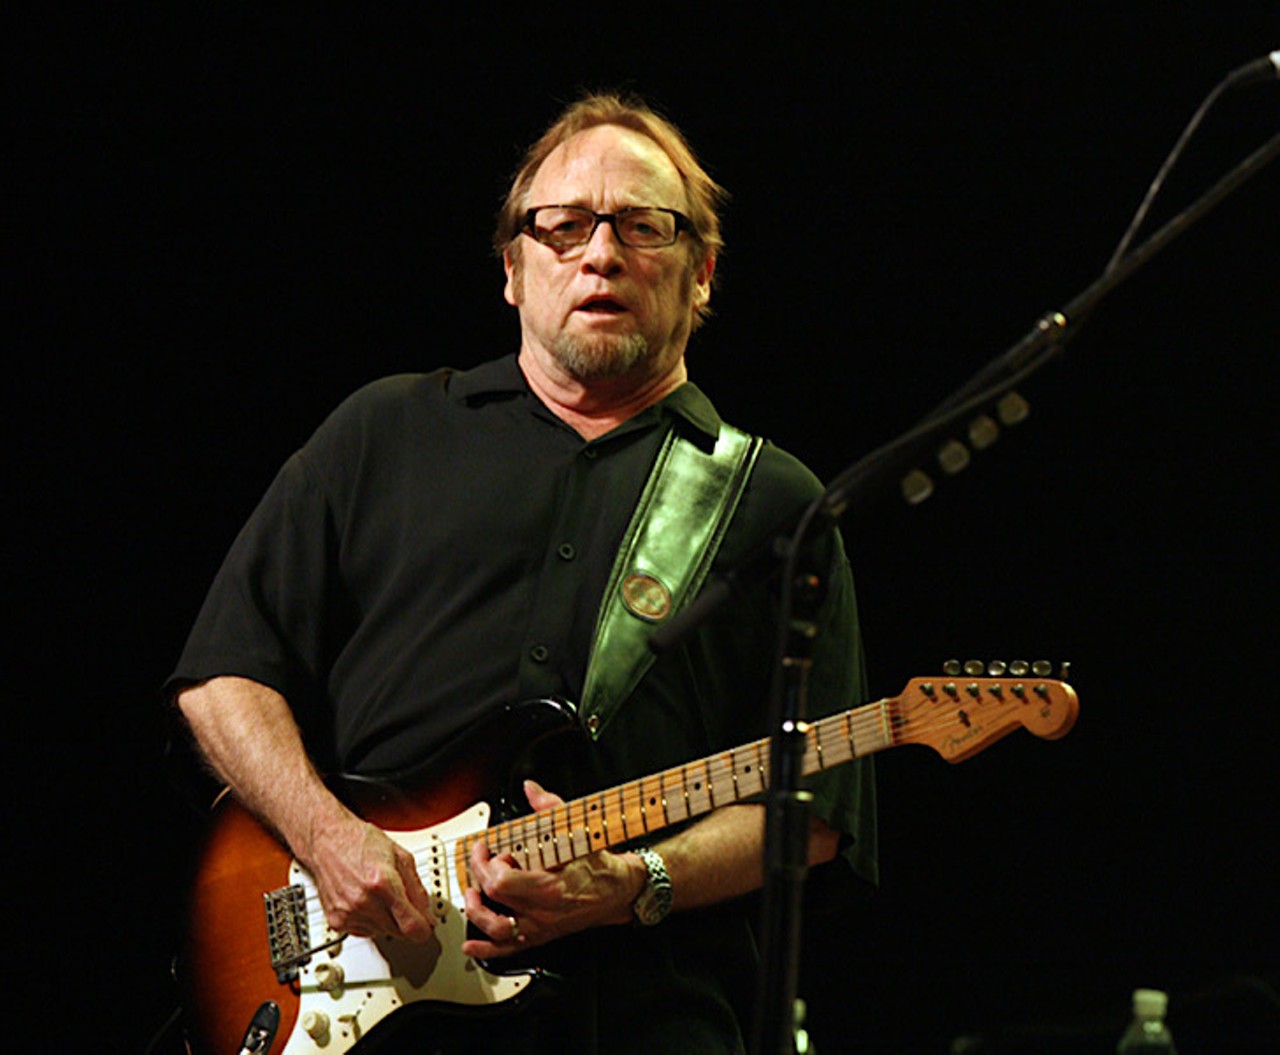 Stephen Stills
Saint Leo gets a shoutout here, as one of the members of Crosby, Stills, Nash & Young went to the liberal arts school before his music career took off. He also attended Admiral Farragut Academy in St. Pete. 
Photo by Eva Rinaldi via Wikimedia Commons